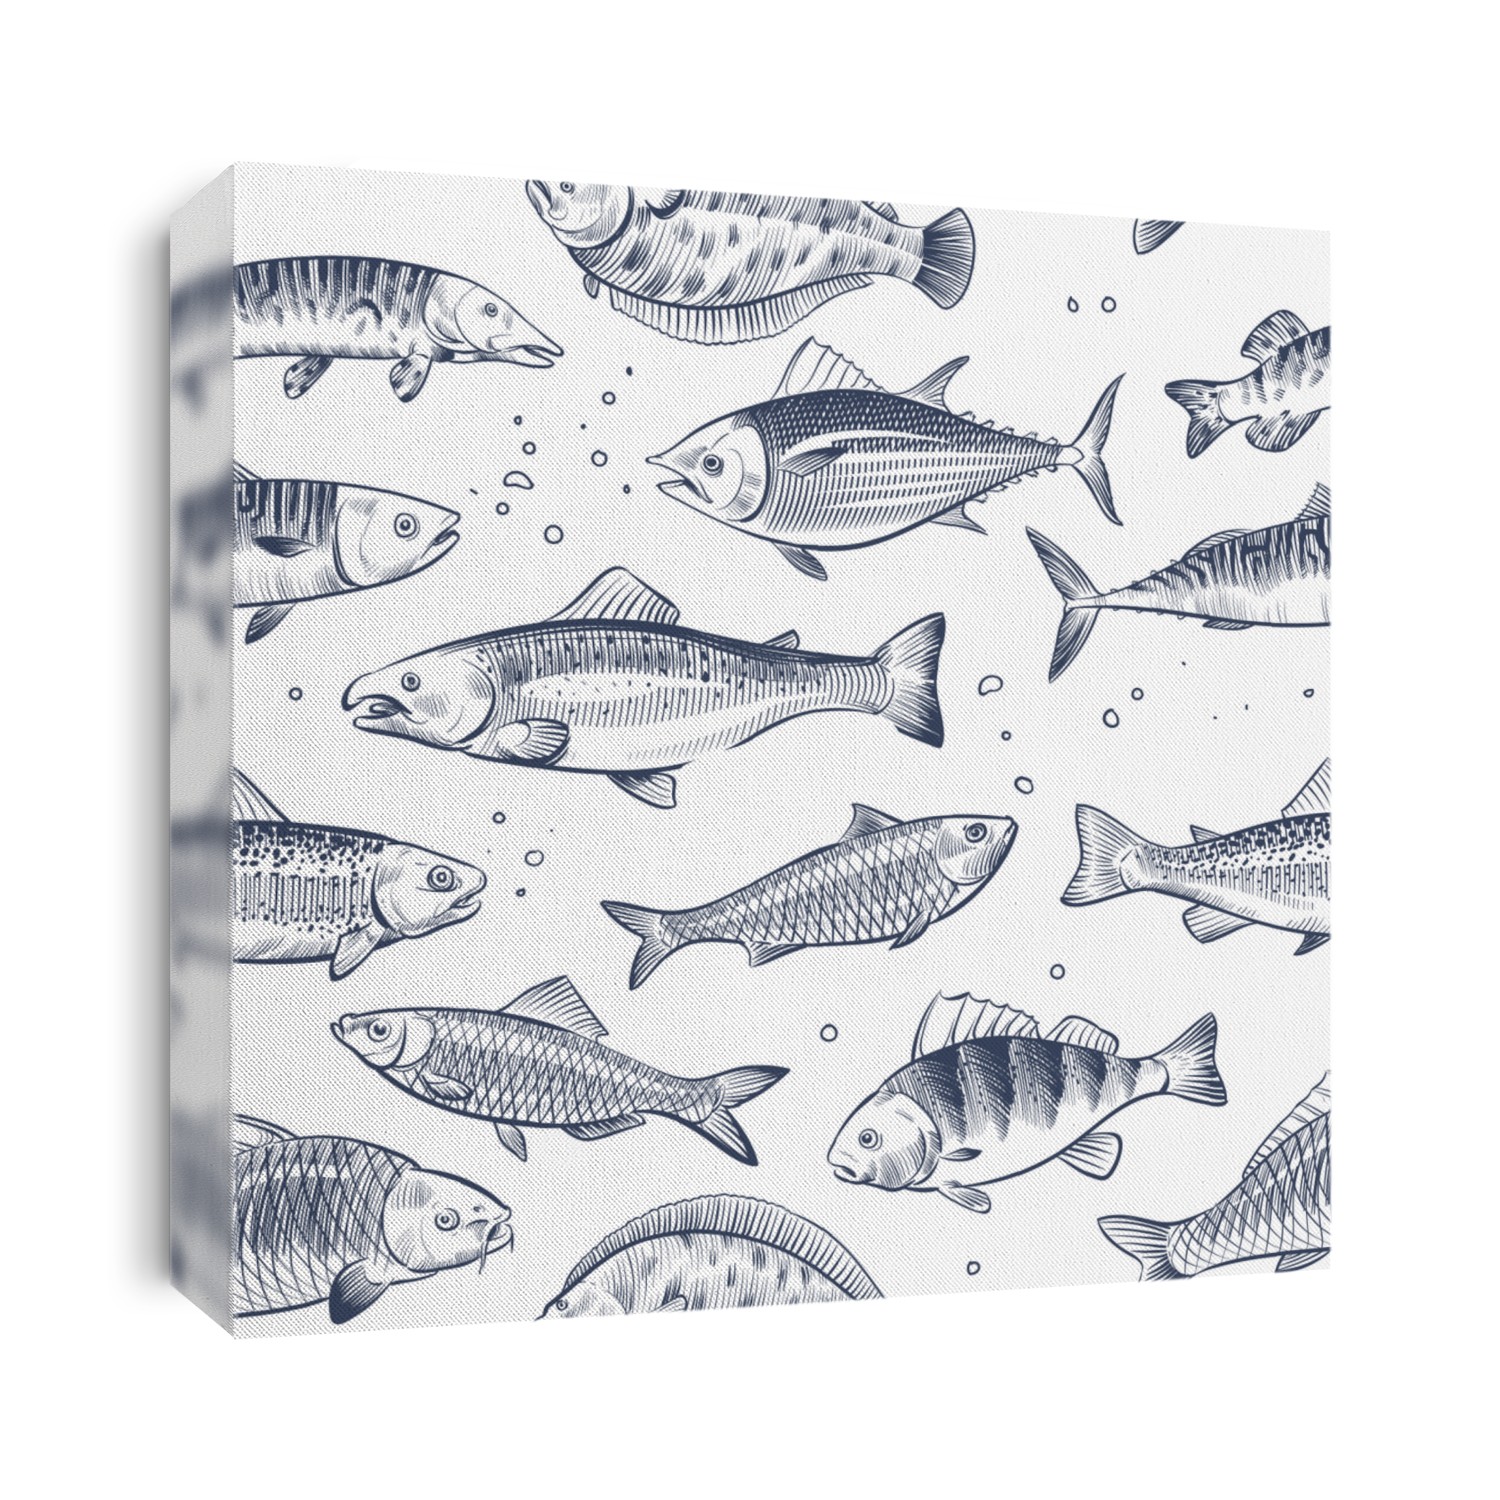 Sketch fishes seamless pattern. Etched ocean fish wrapper vintage background